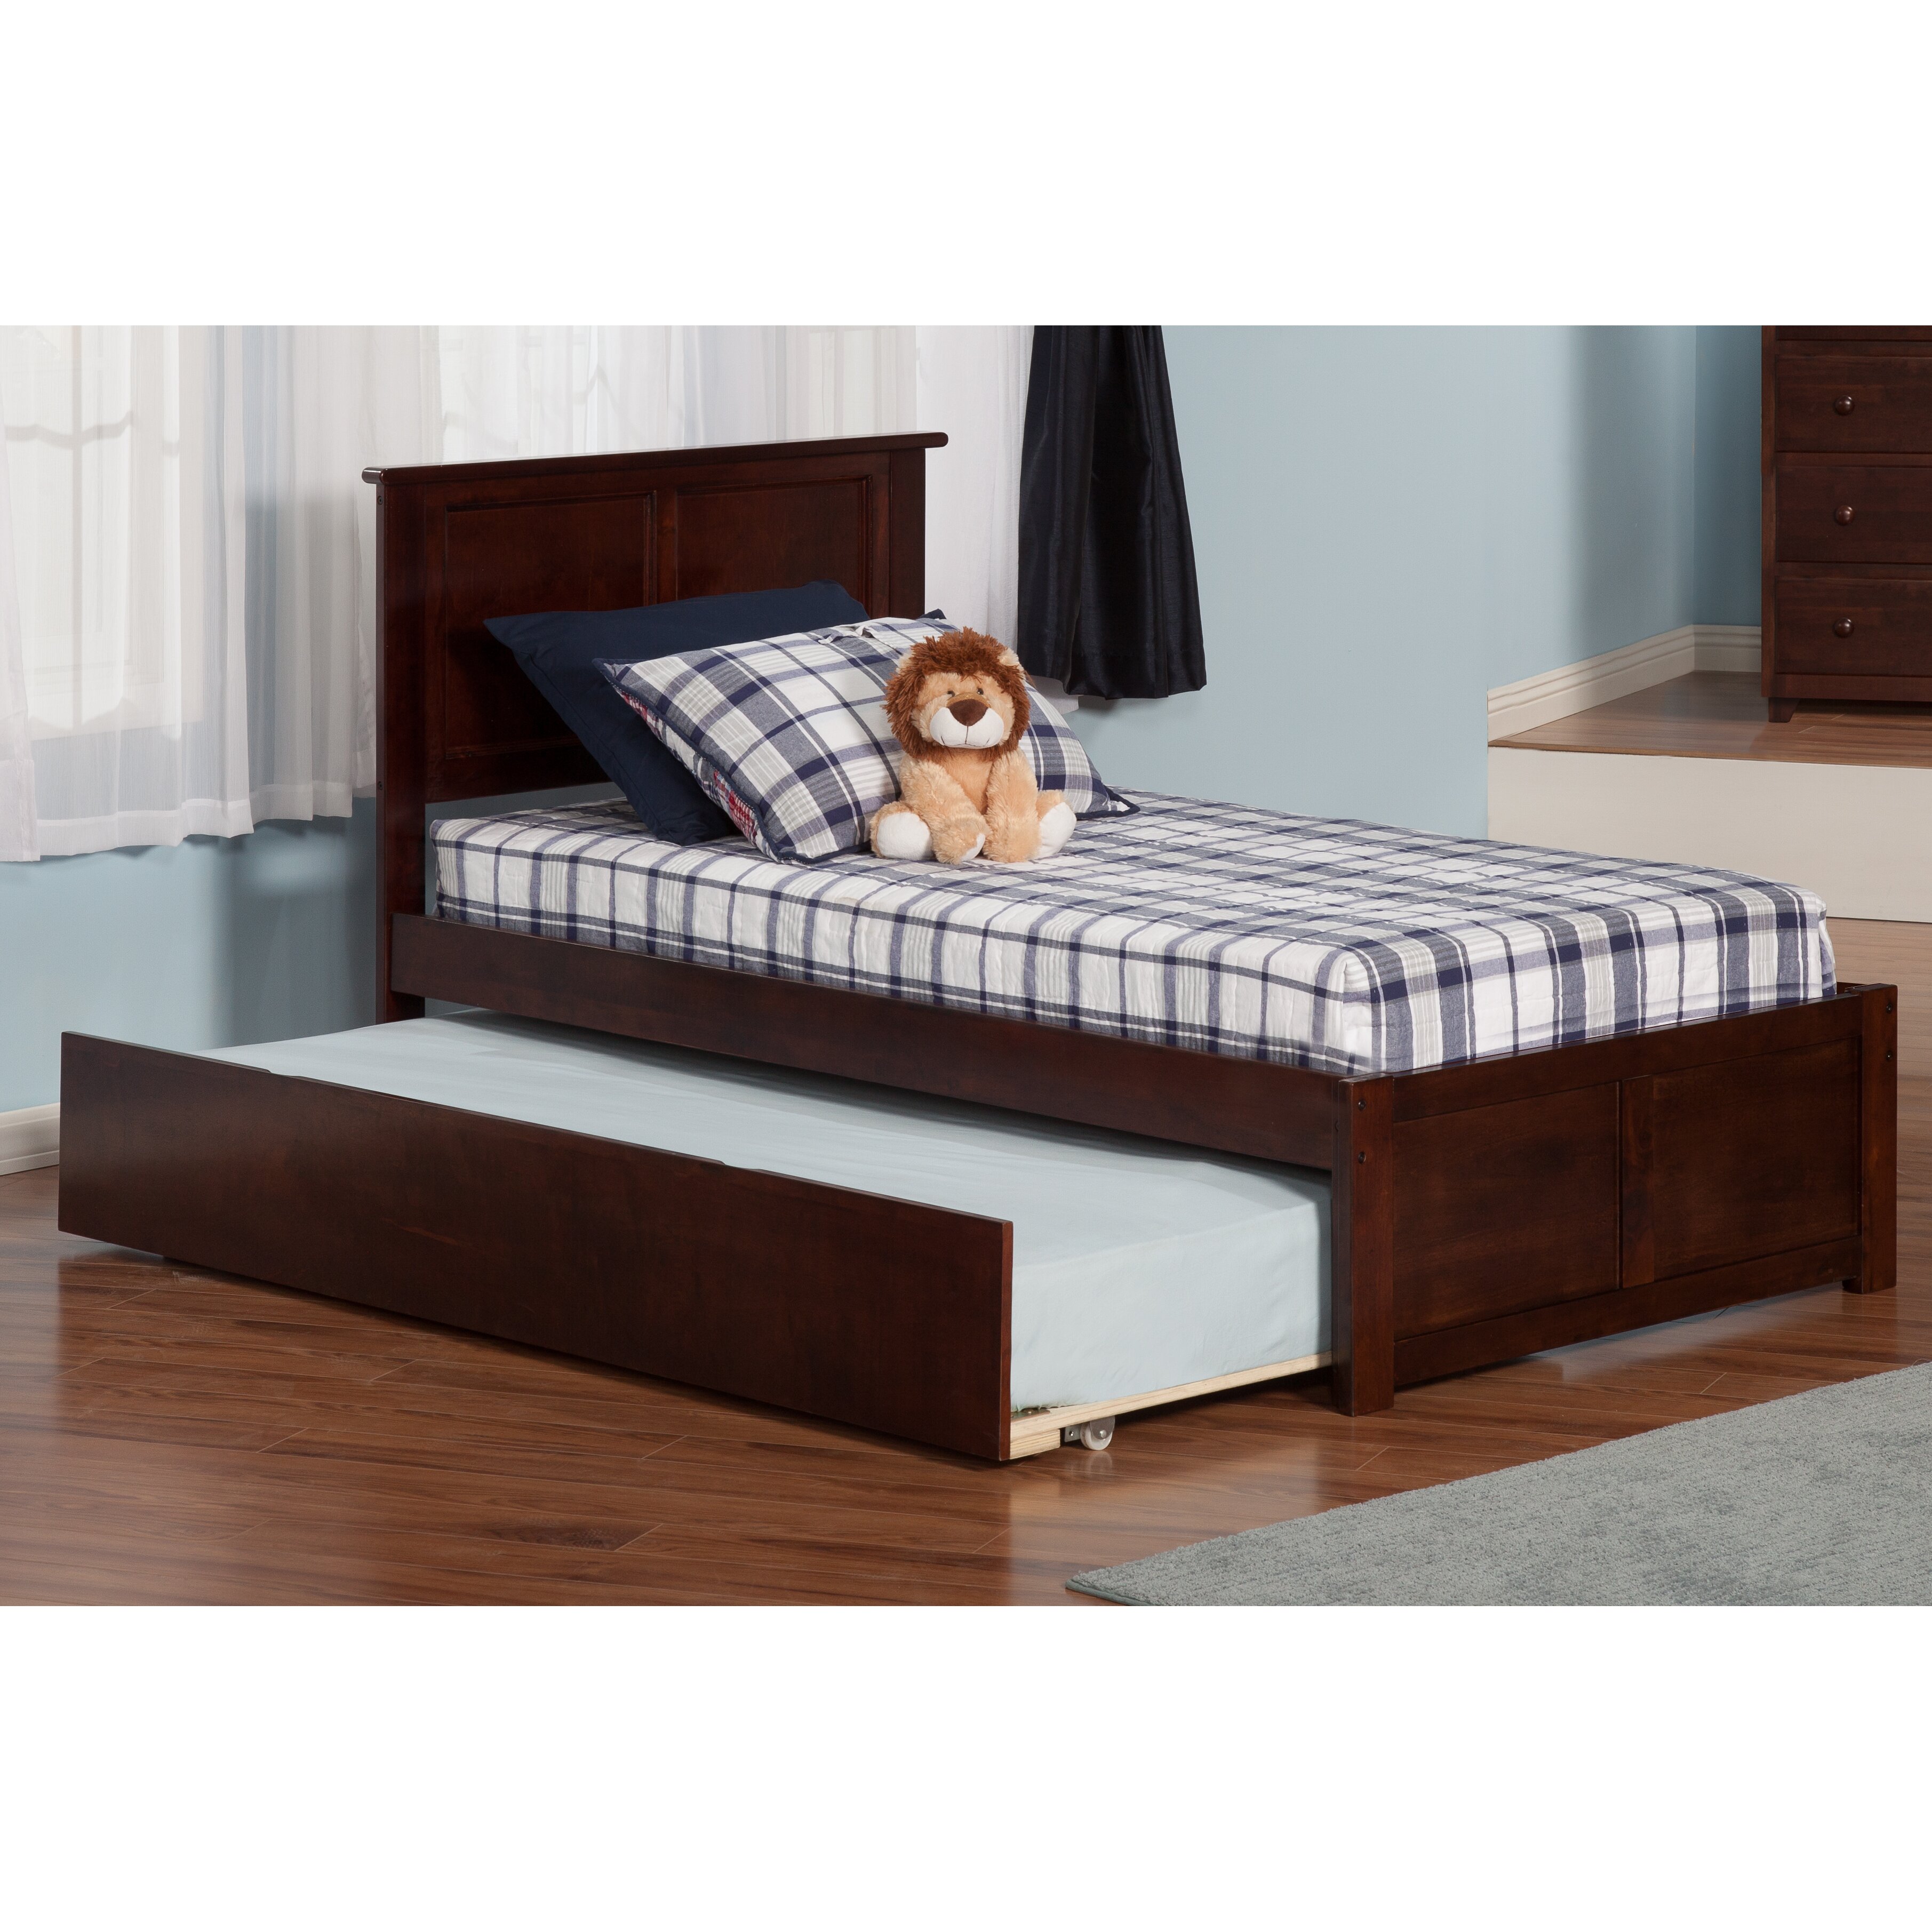 Viv + Rae Greyson Panel Bed with Trundle & Reviews | Wayfair